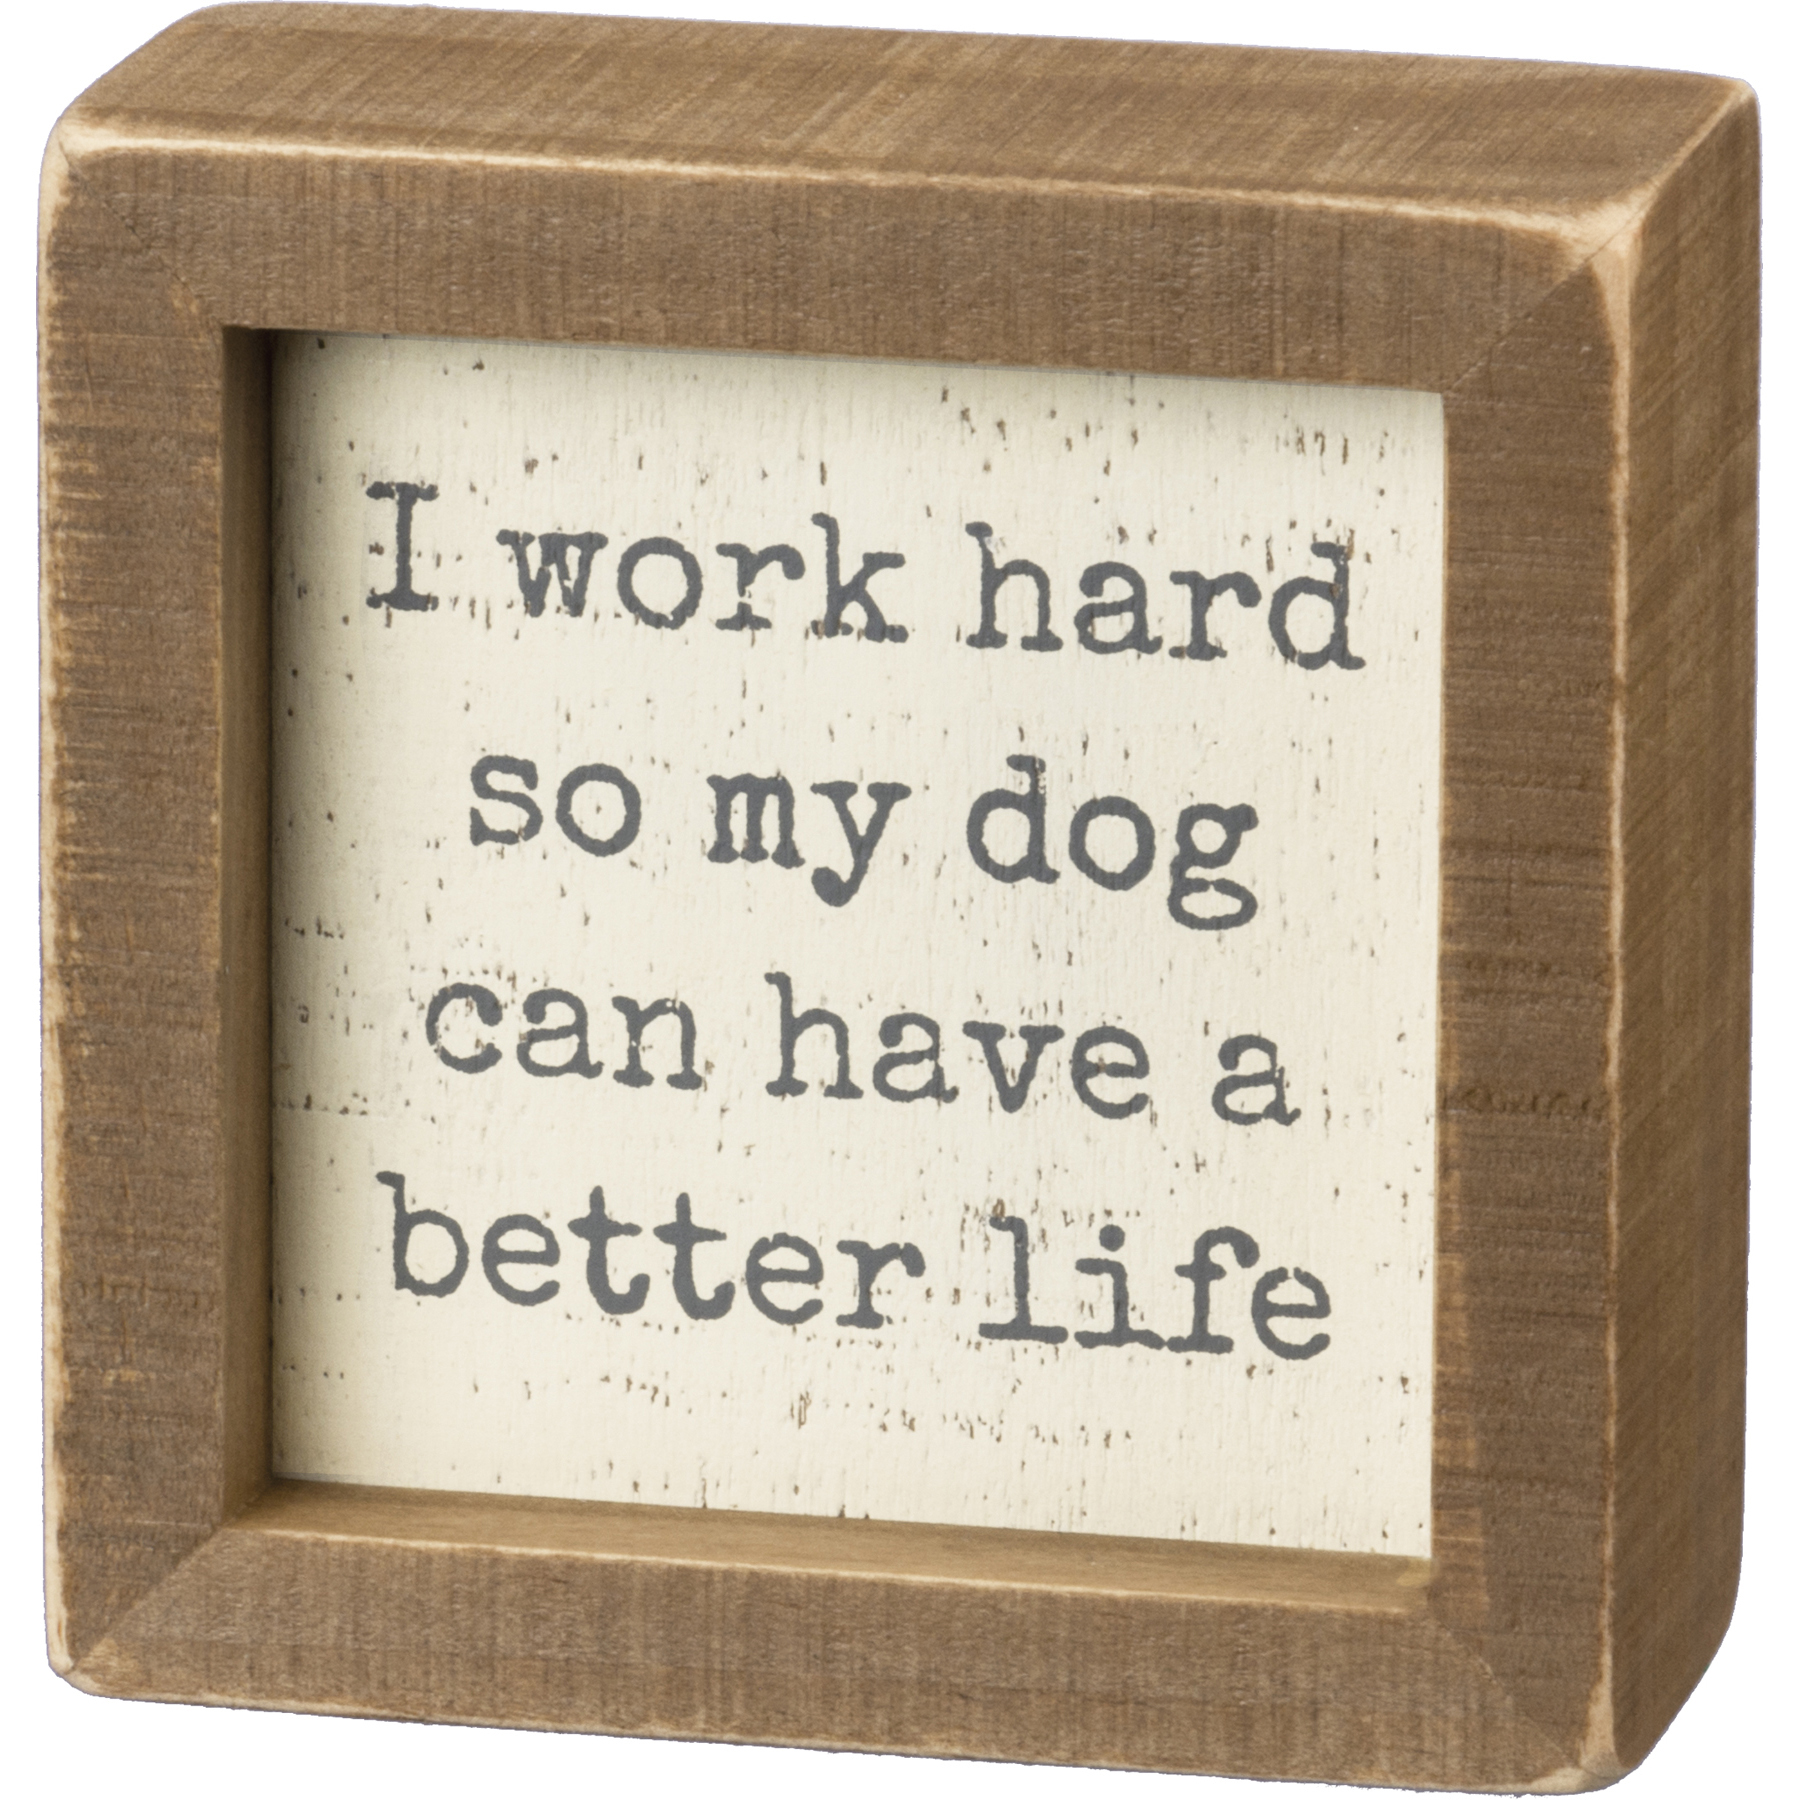 Primitives by Kathy I WORK HARD SO MY DOG HAS BETTER LIFE Wood Box Sign 4" x 4" 